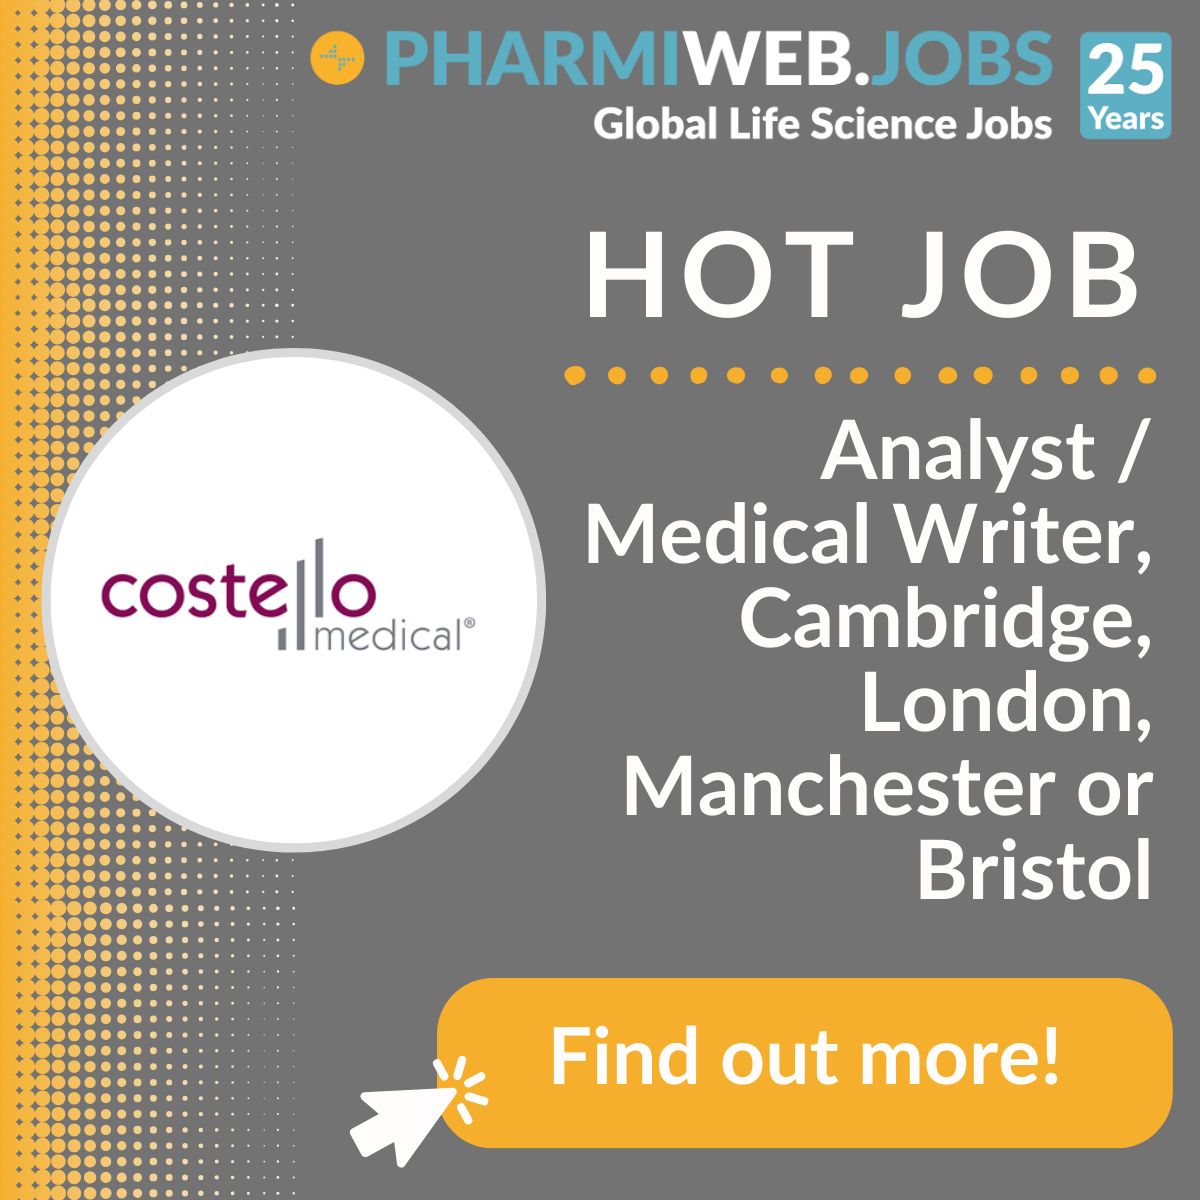 Hot Job! Analyst / Medical Writer - Cambridge, London, Manchester, or Bristol: buff.ly/4cHLeaJ Find out more and apply now: buff.ly/4cHLeaJ #medicalwriter #medcomms #analystjobs #medicalwriterjobs #costellomedical